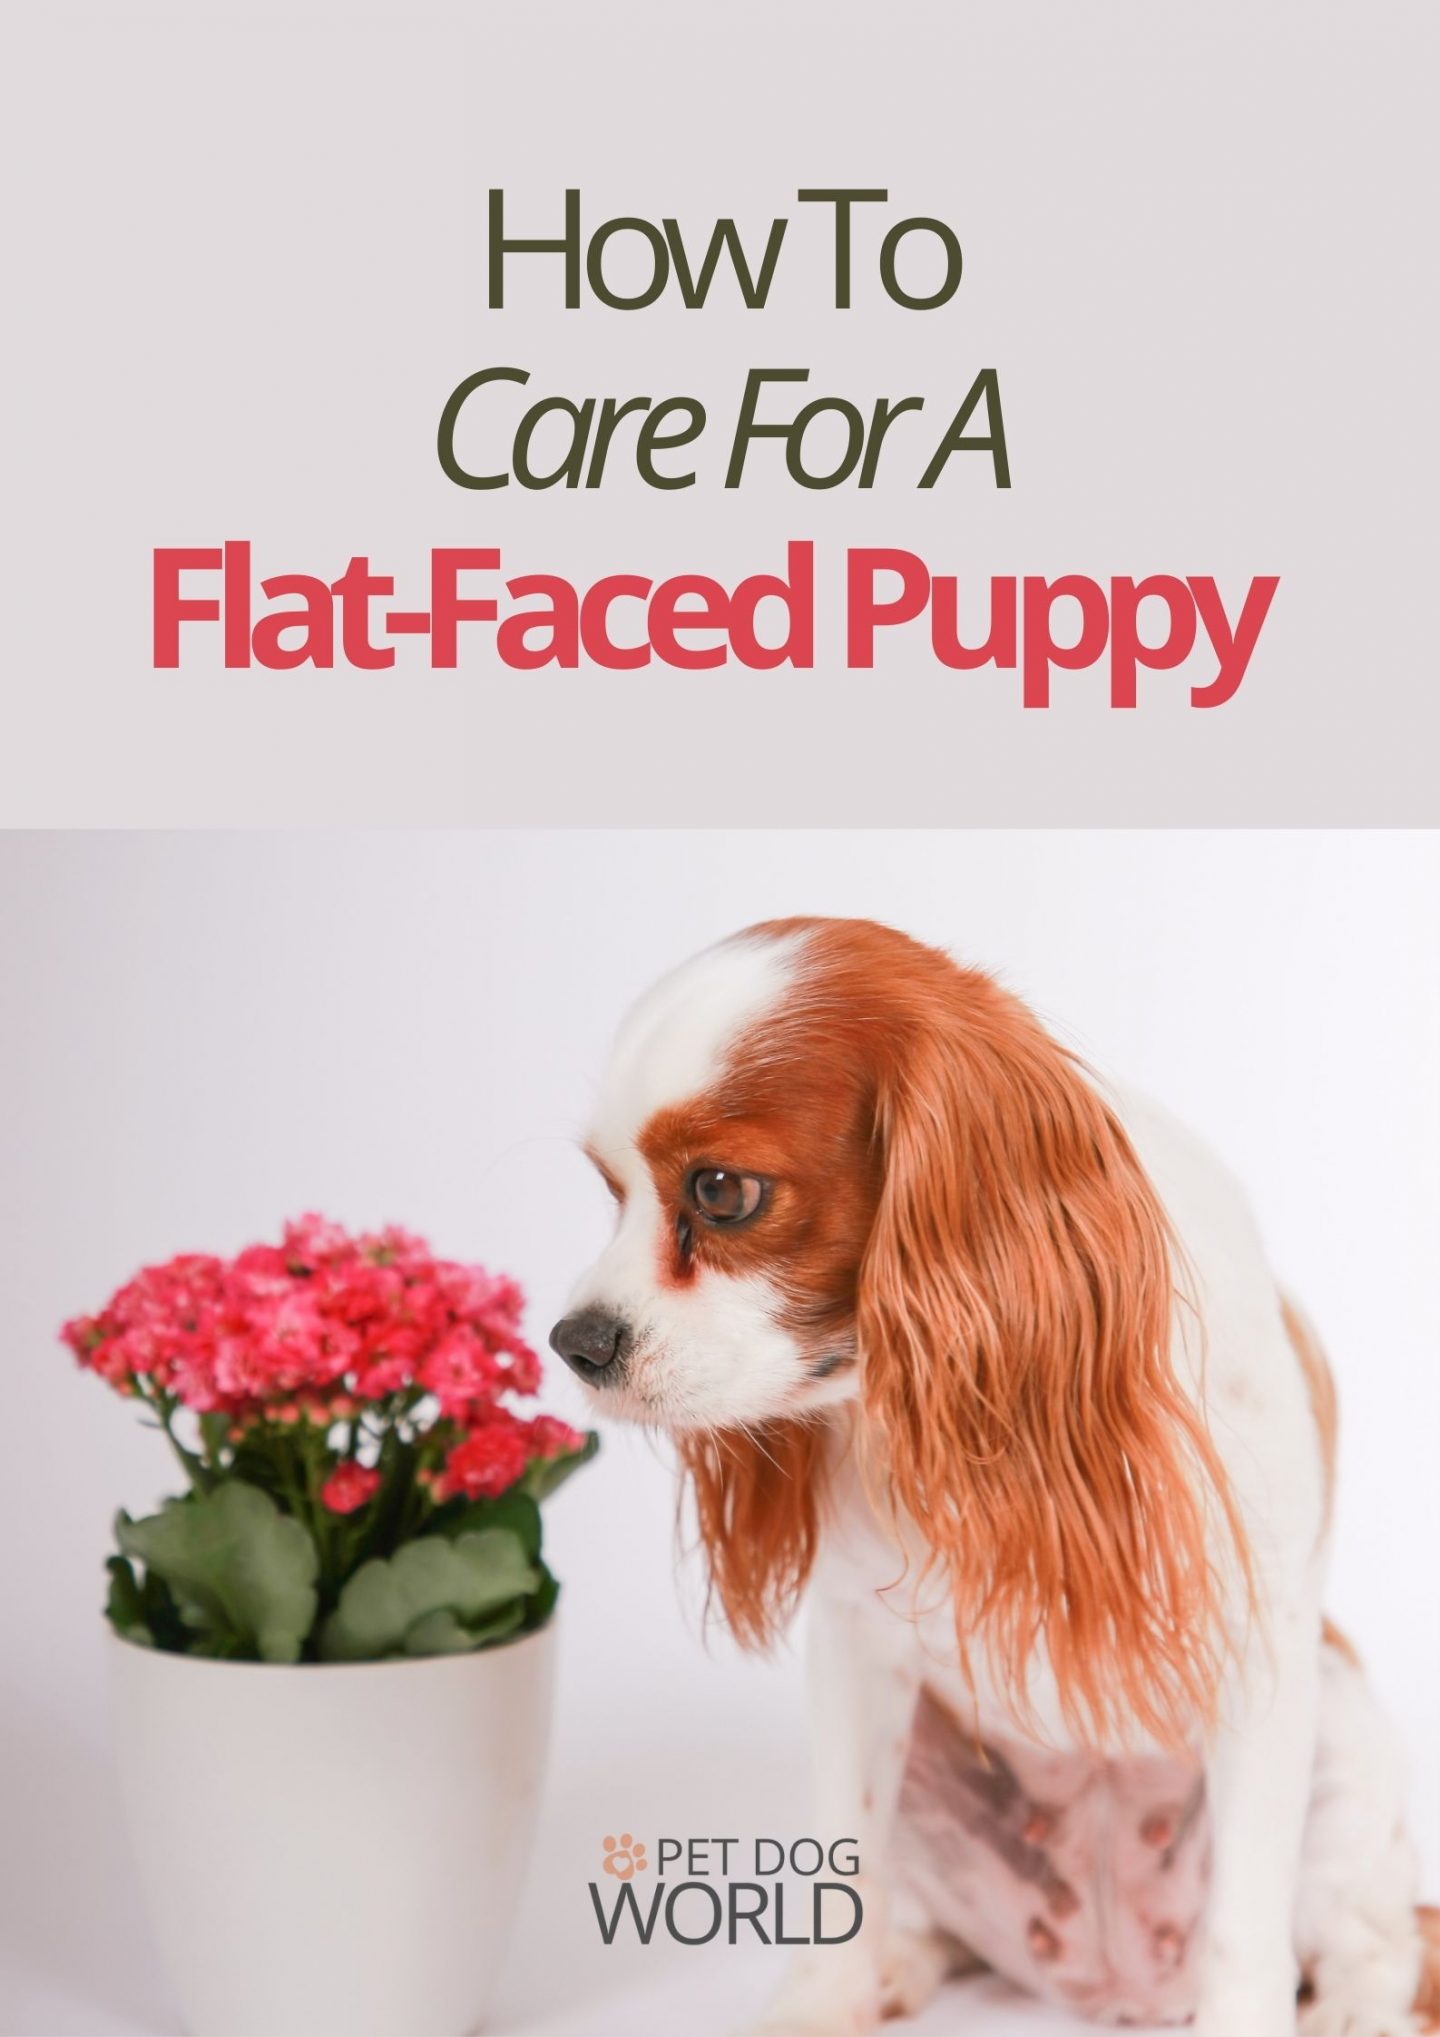 In this post, we’ll discuss three techniques for helping a flat-faced puppy flourish despite some of the challenges faced.